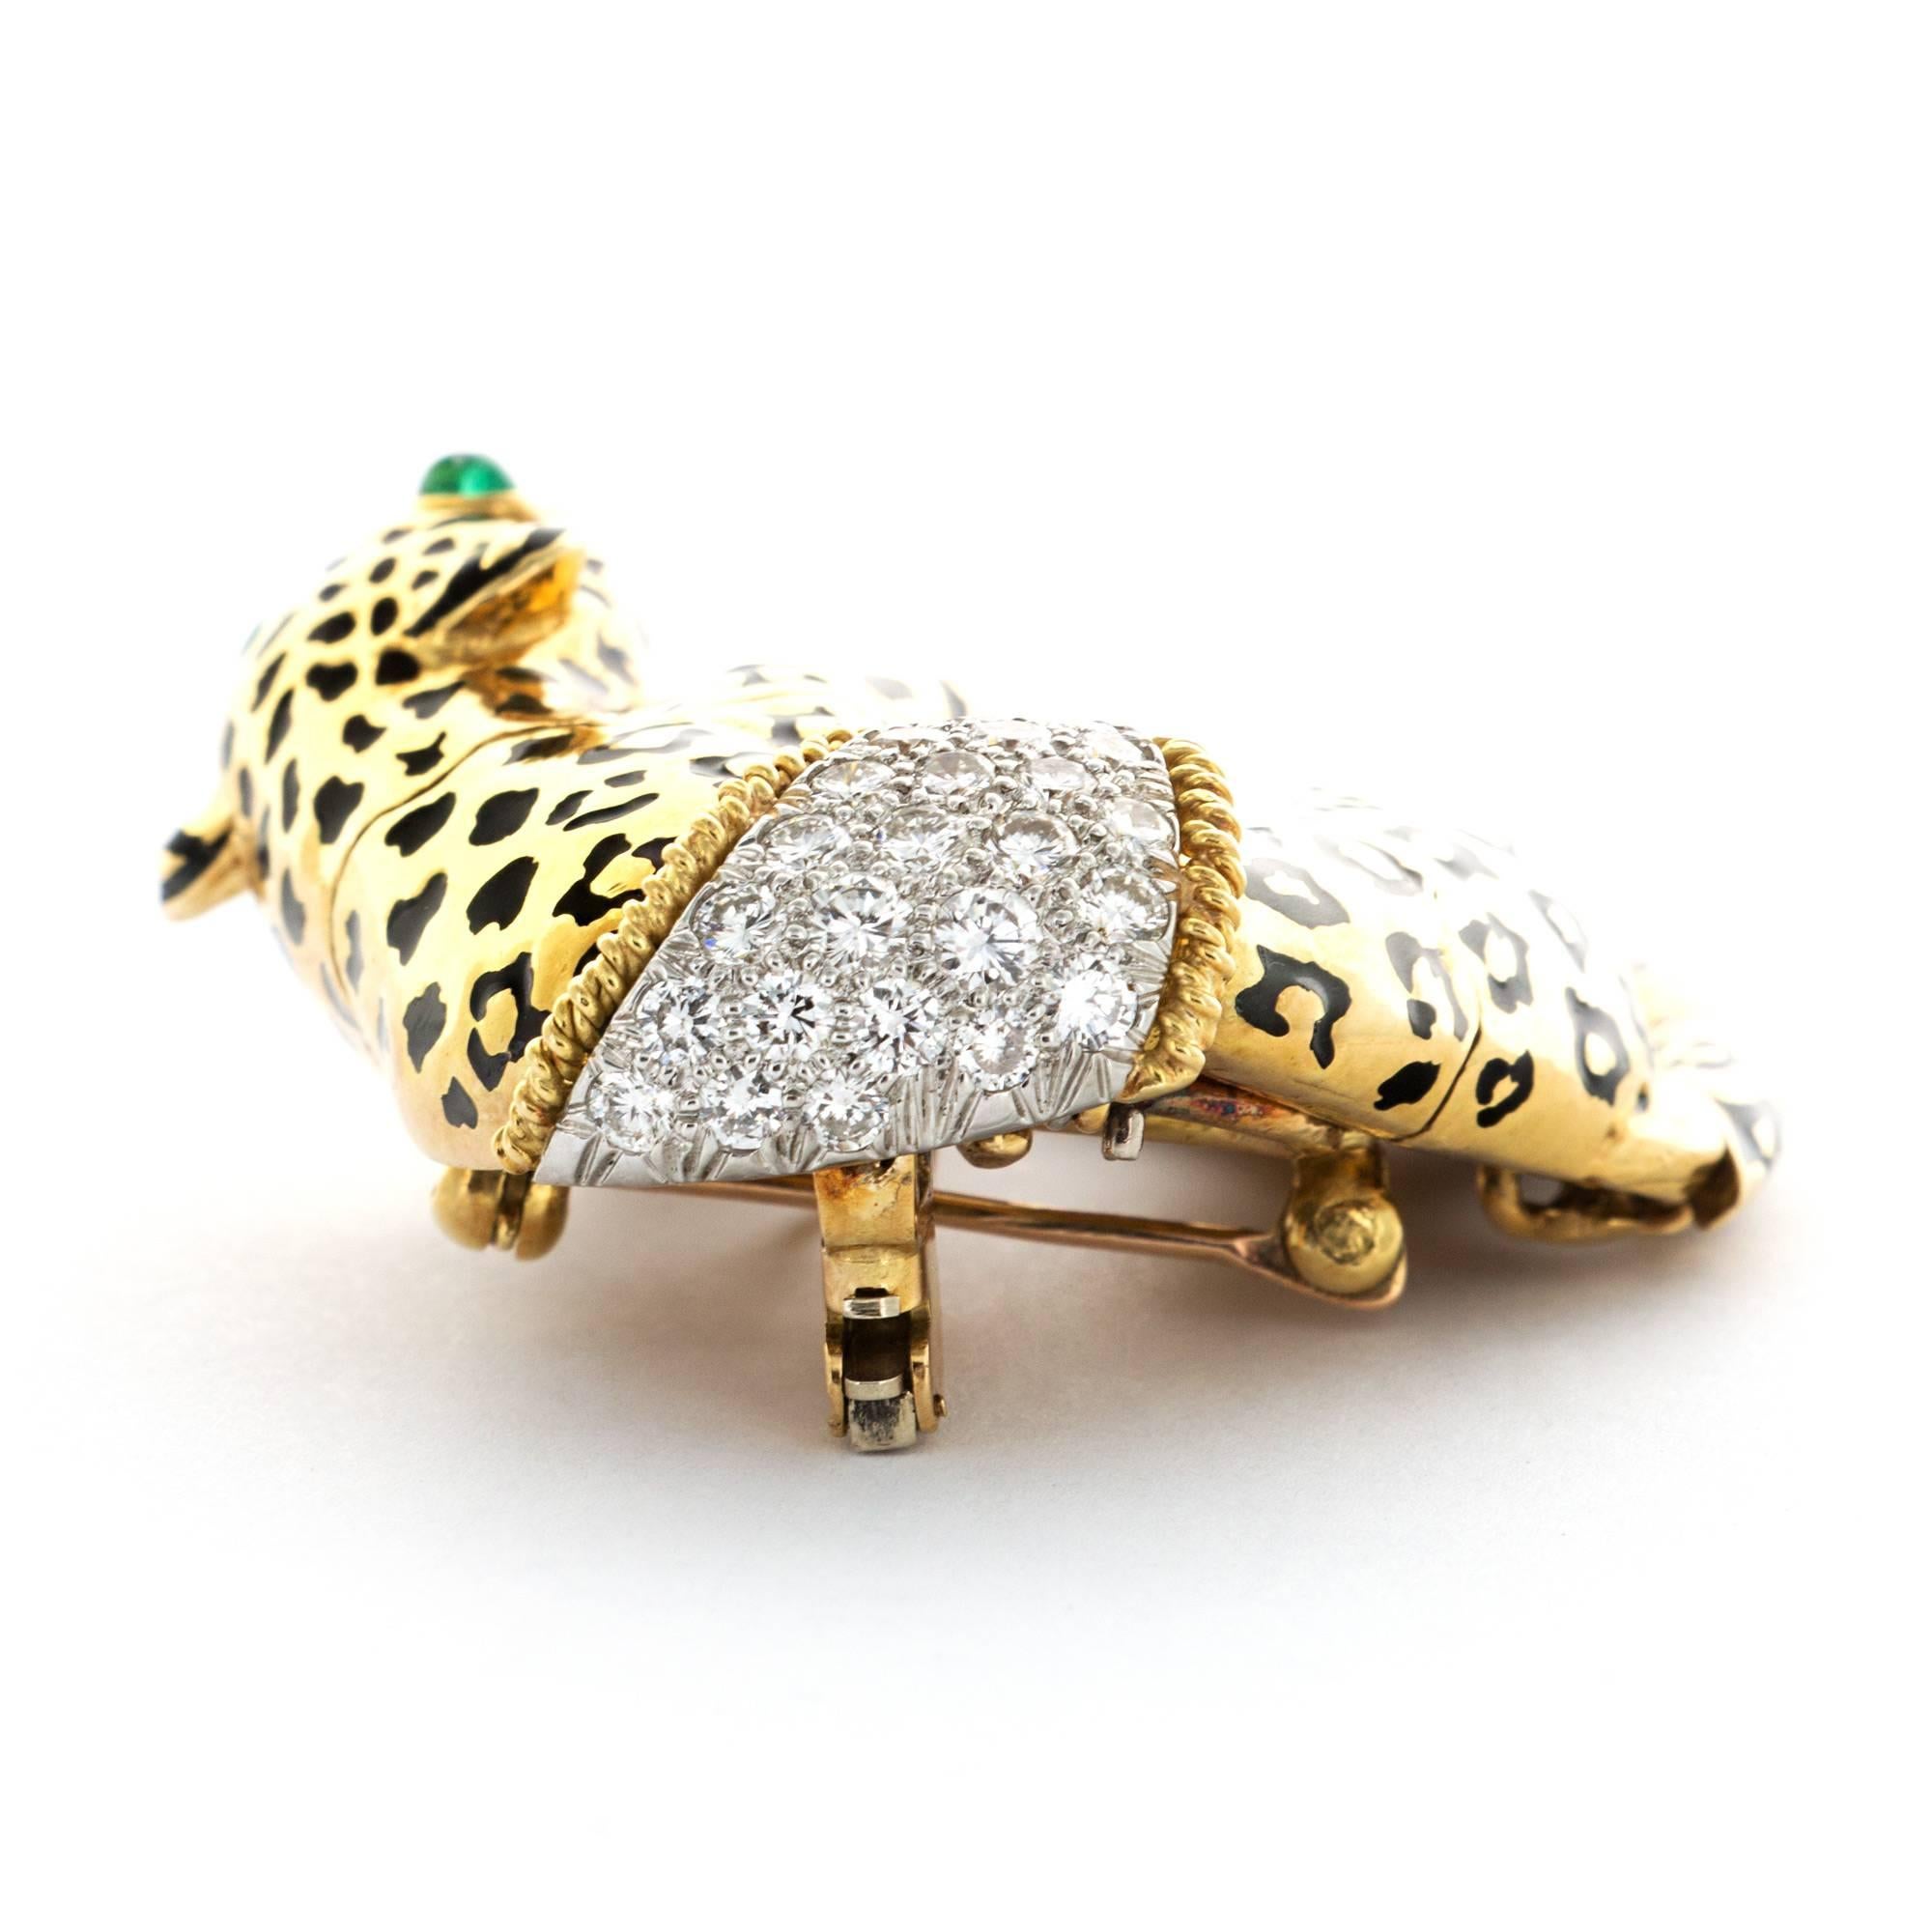 A Stunning Draped Panther Brooch in 18k Yellow Gold. Black Enamel, Diamonds, and Emeralds. Stamped with Makers Mark, "WEBB".

